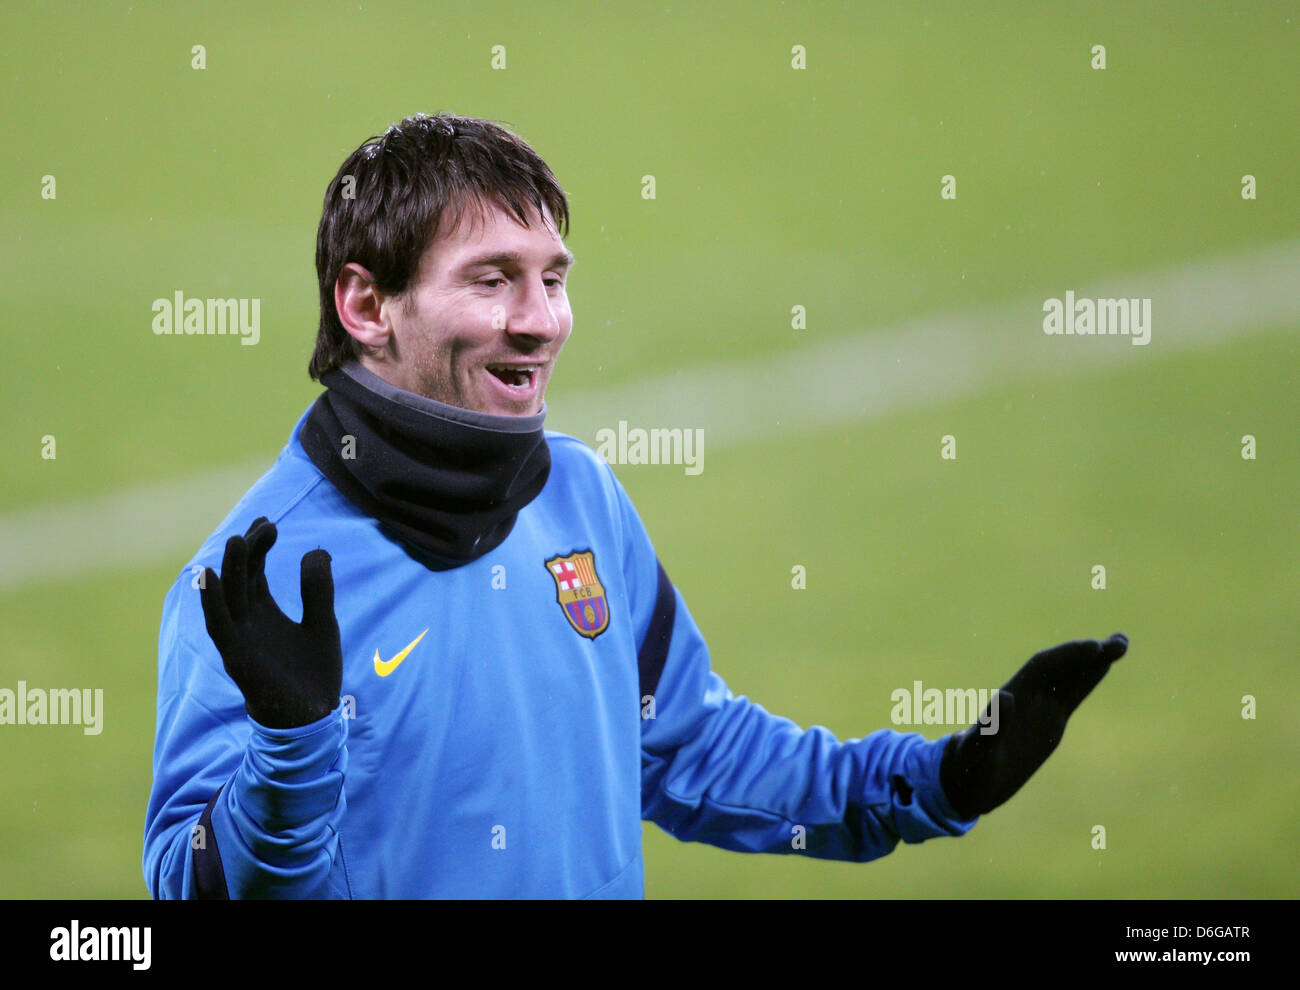 Barcelona's Lionel Messi participates in a practice session at BayArena in Leverkusen, Germany, 13 February 2012. On 14 February 2012, Barcelona will play Leverkusen in the UEFA Champions League last 16 round. Photo: Rolf Vennenbernd Stock Photo